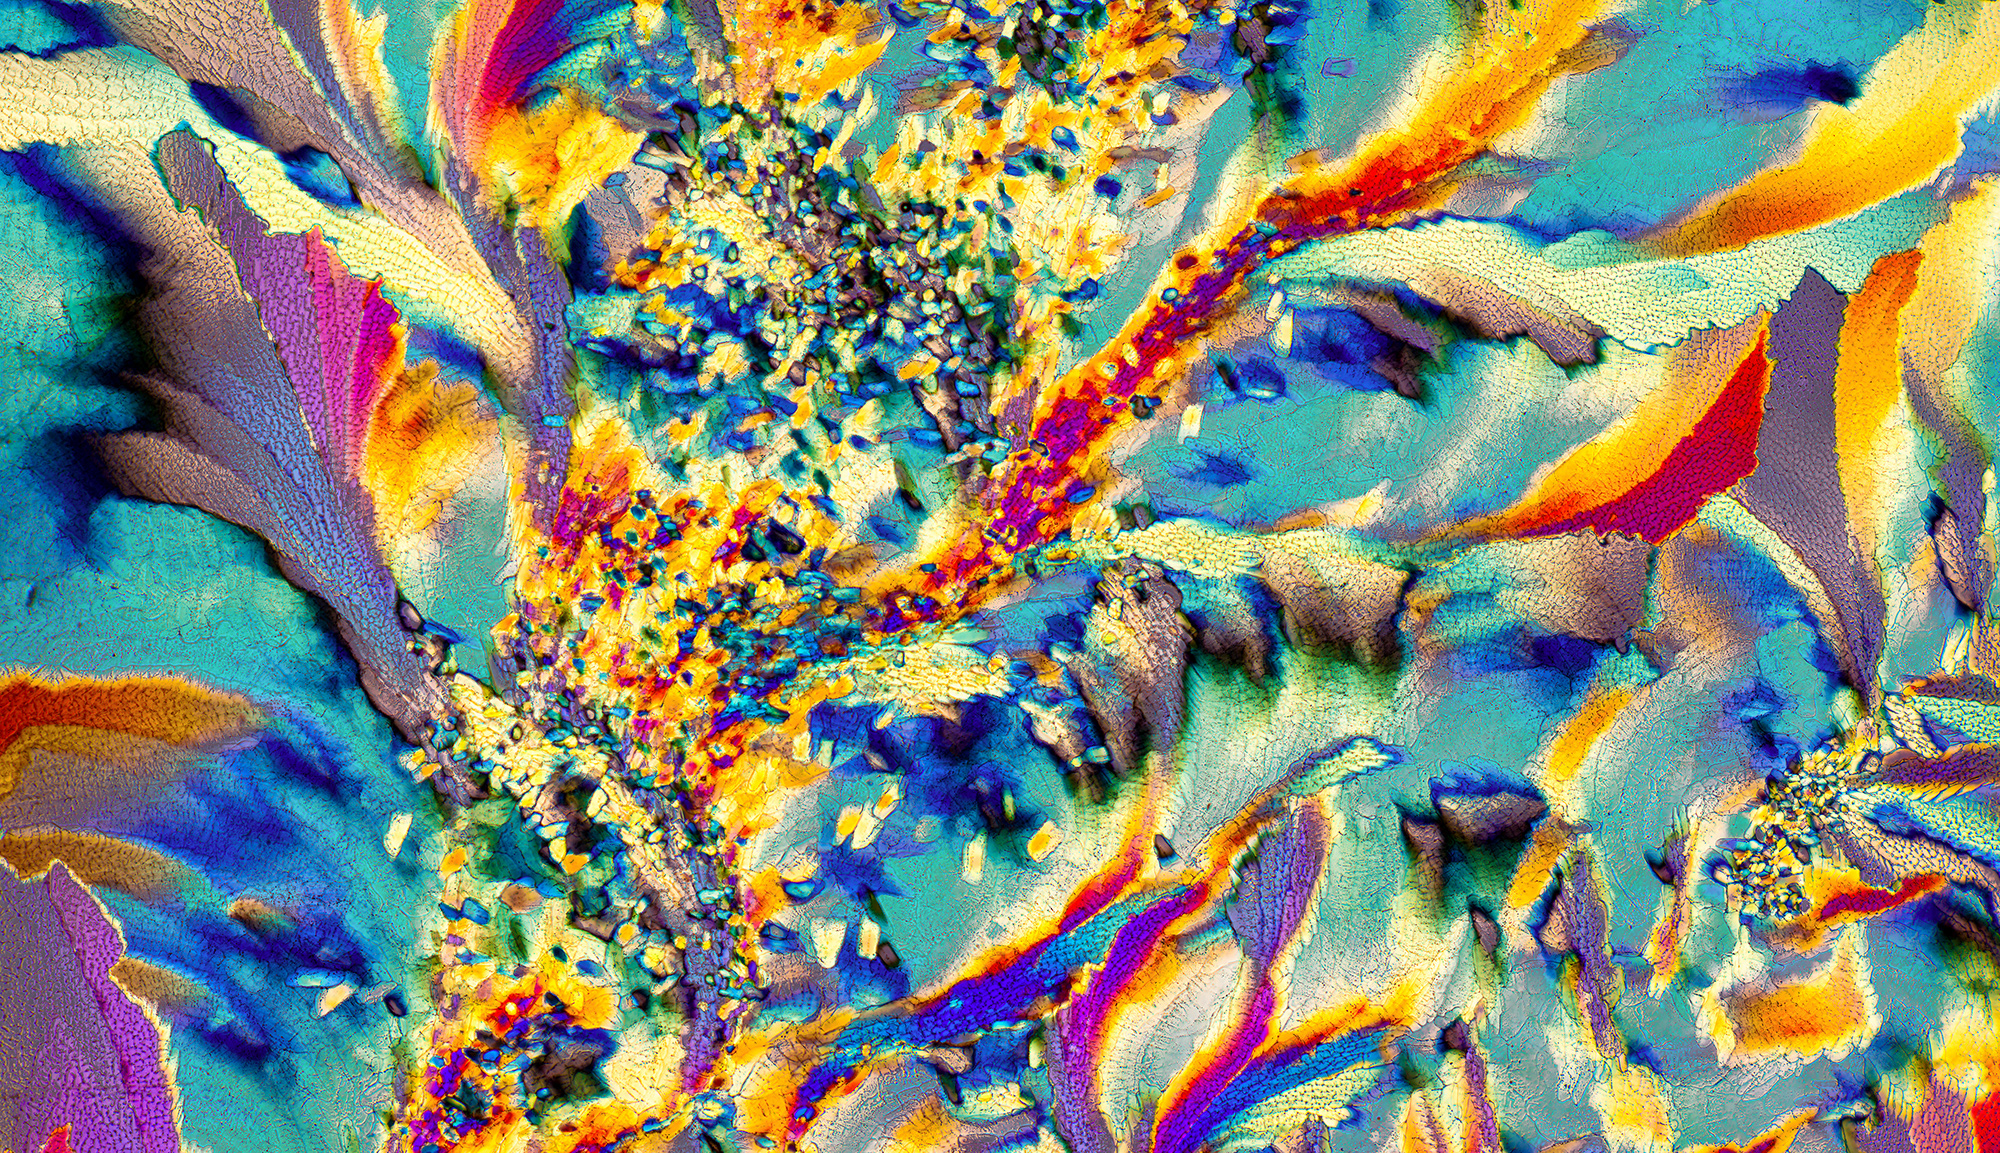 The Art of Perfection - No.3 Gin photographed on a microscopic level by Justin Zoll